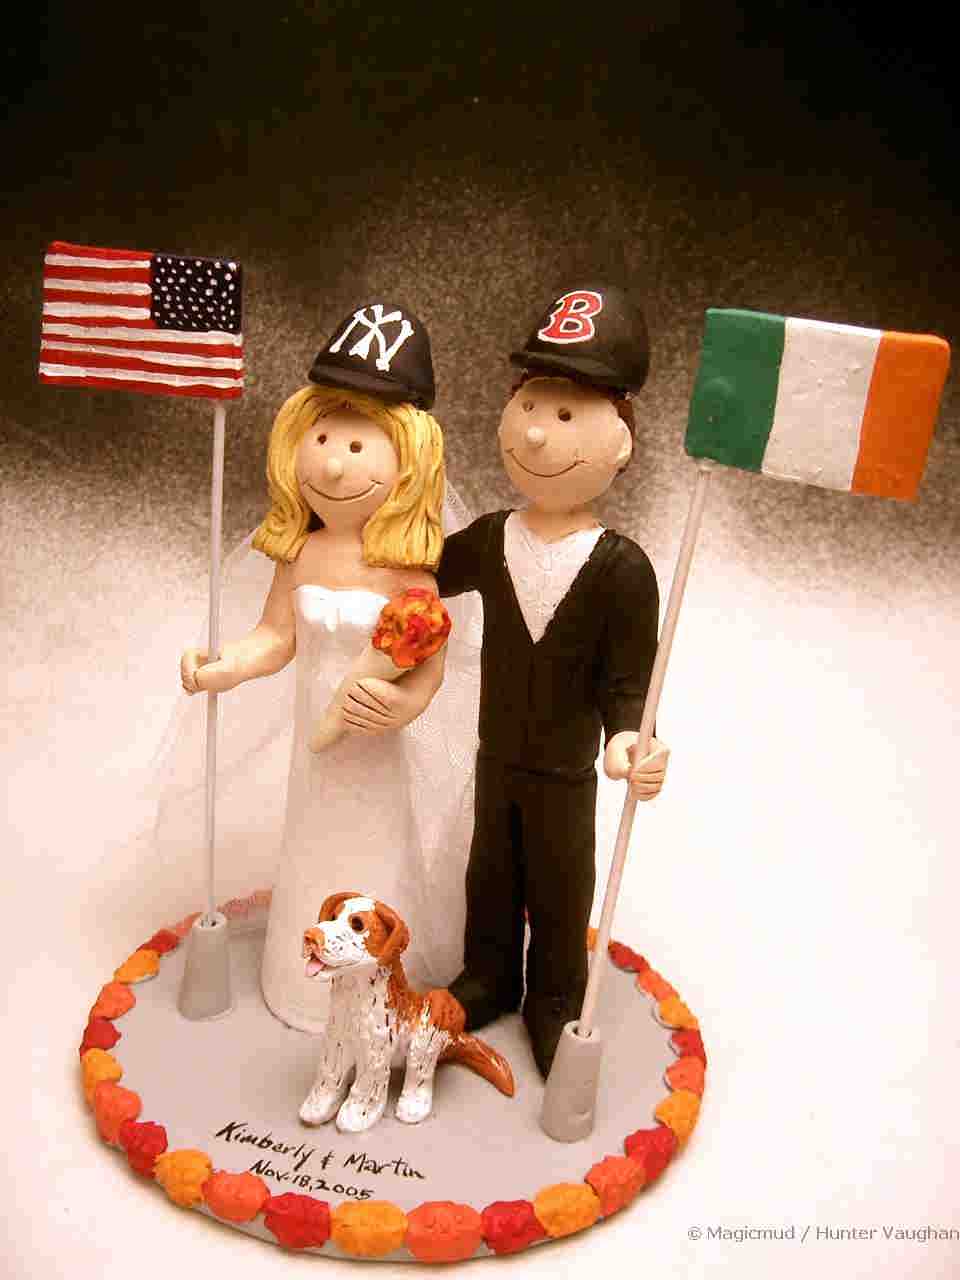 Home Run for True Love with a Baseball fans Wedding Cake Topper